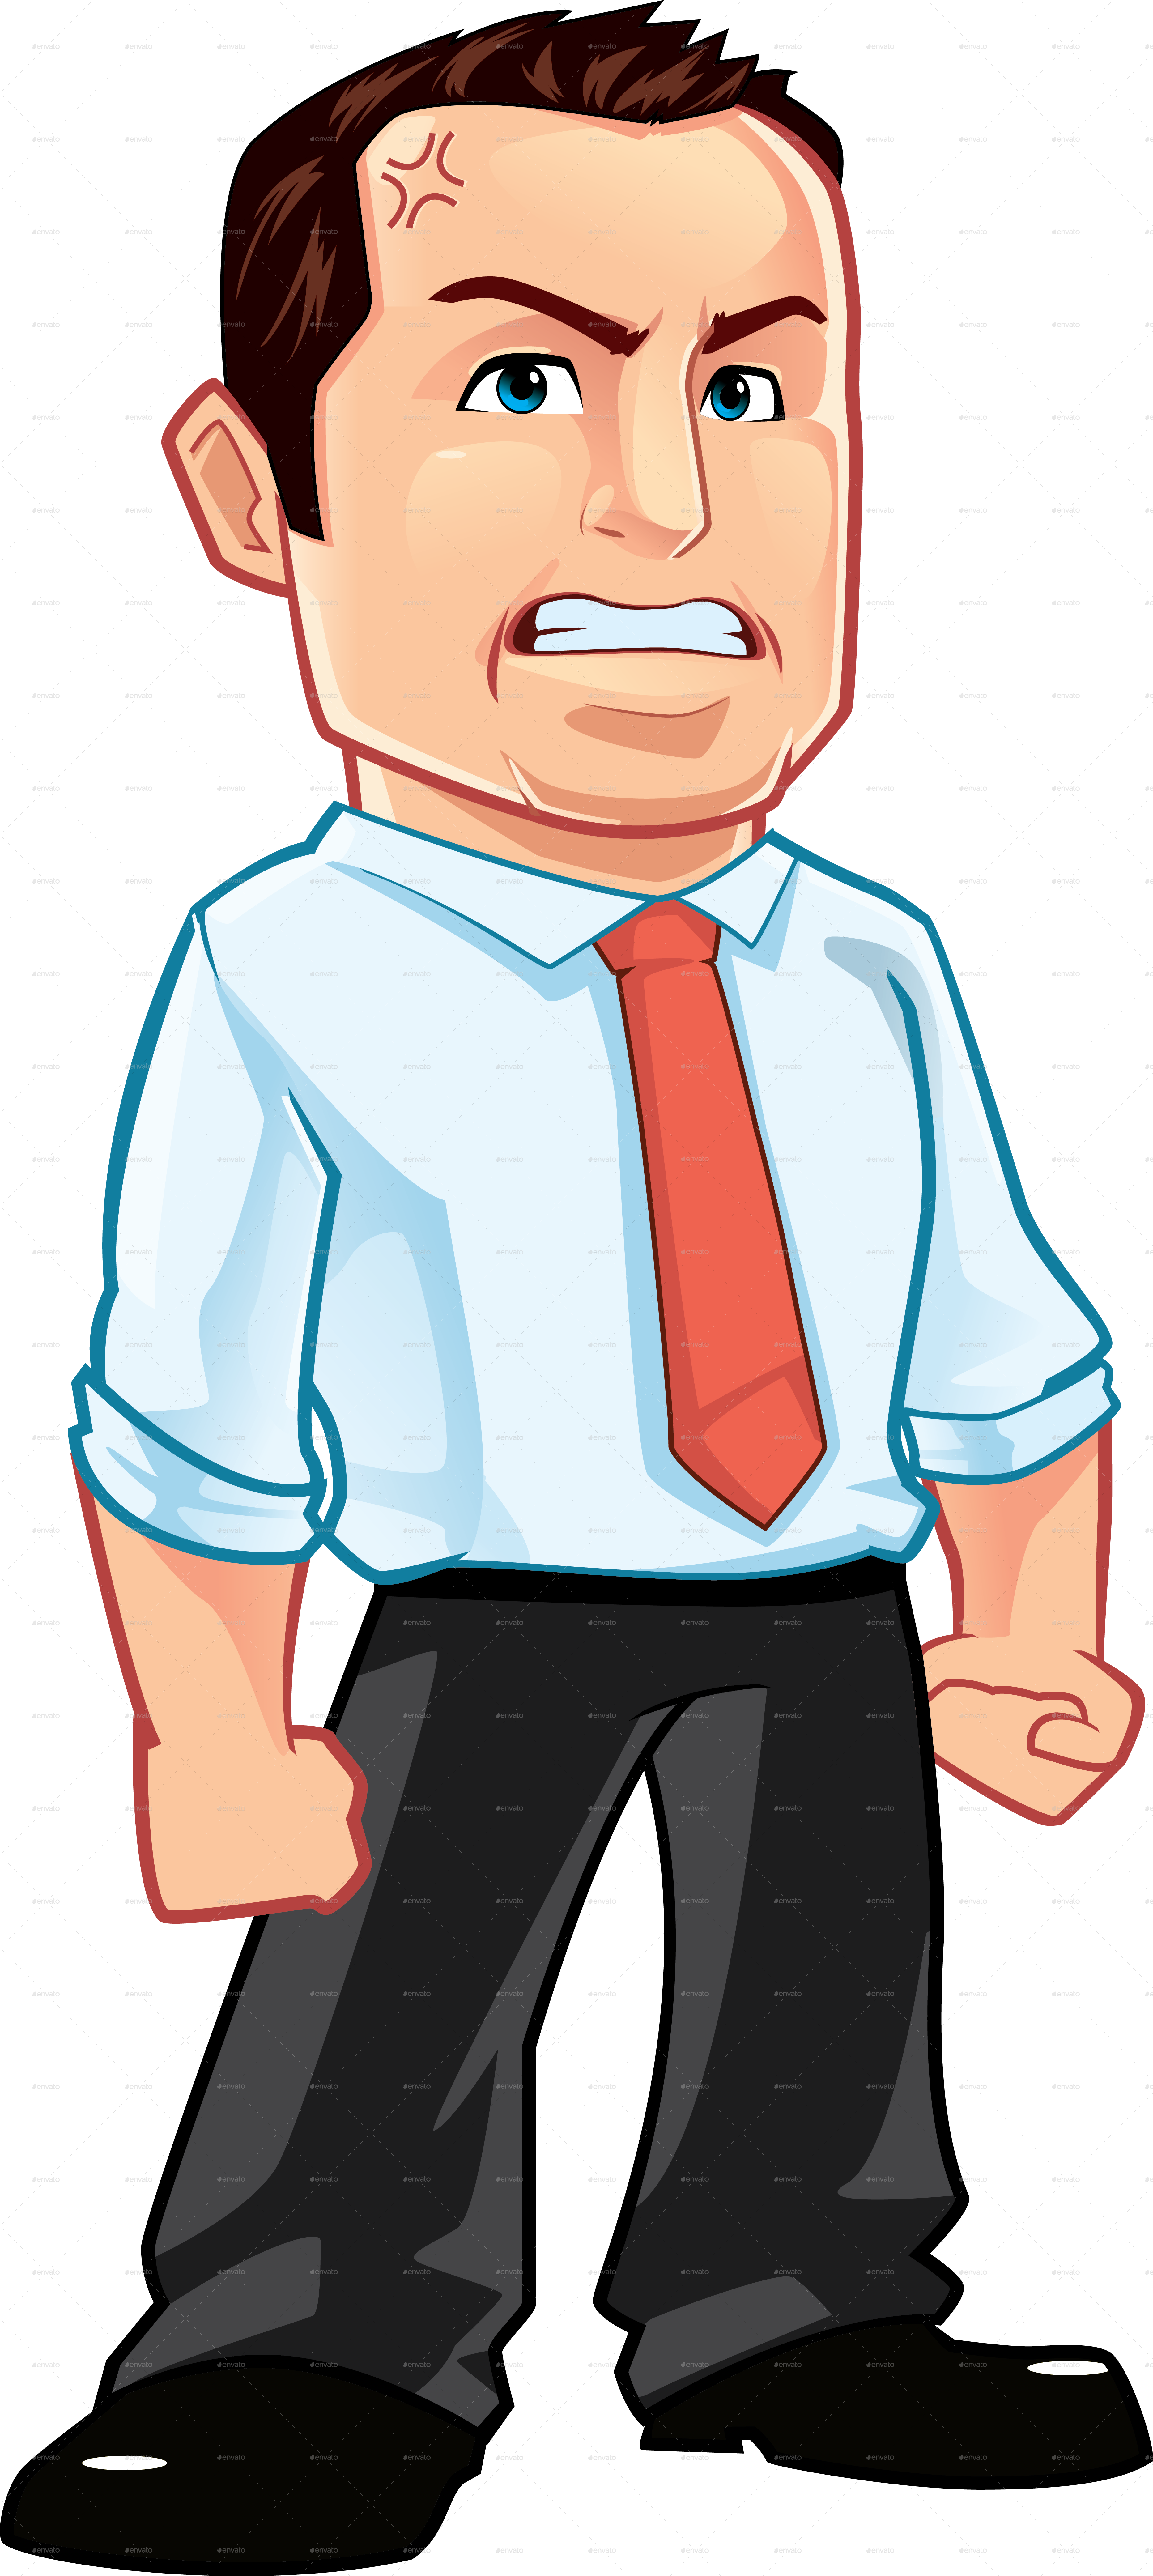 Employee angry by dee. Mad clipart businessman